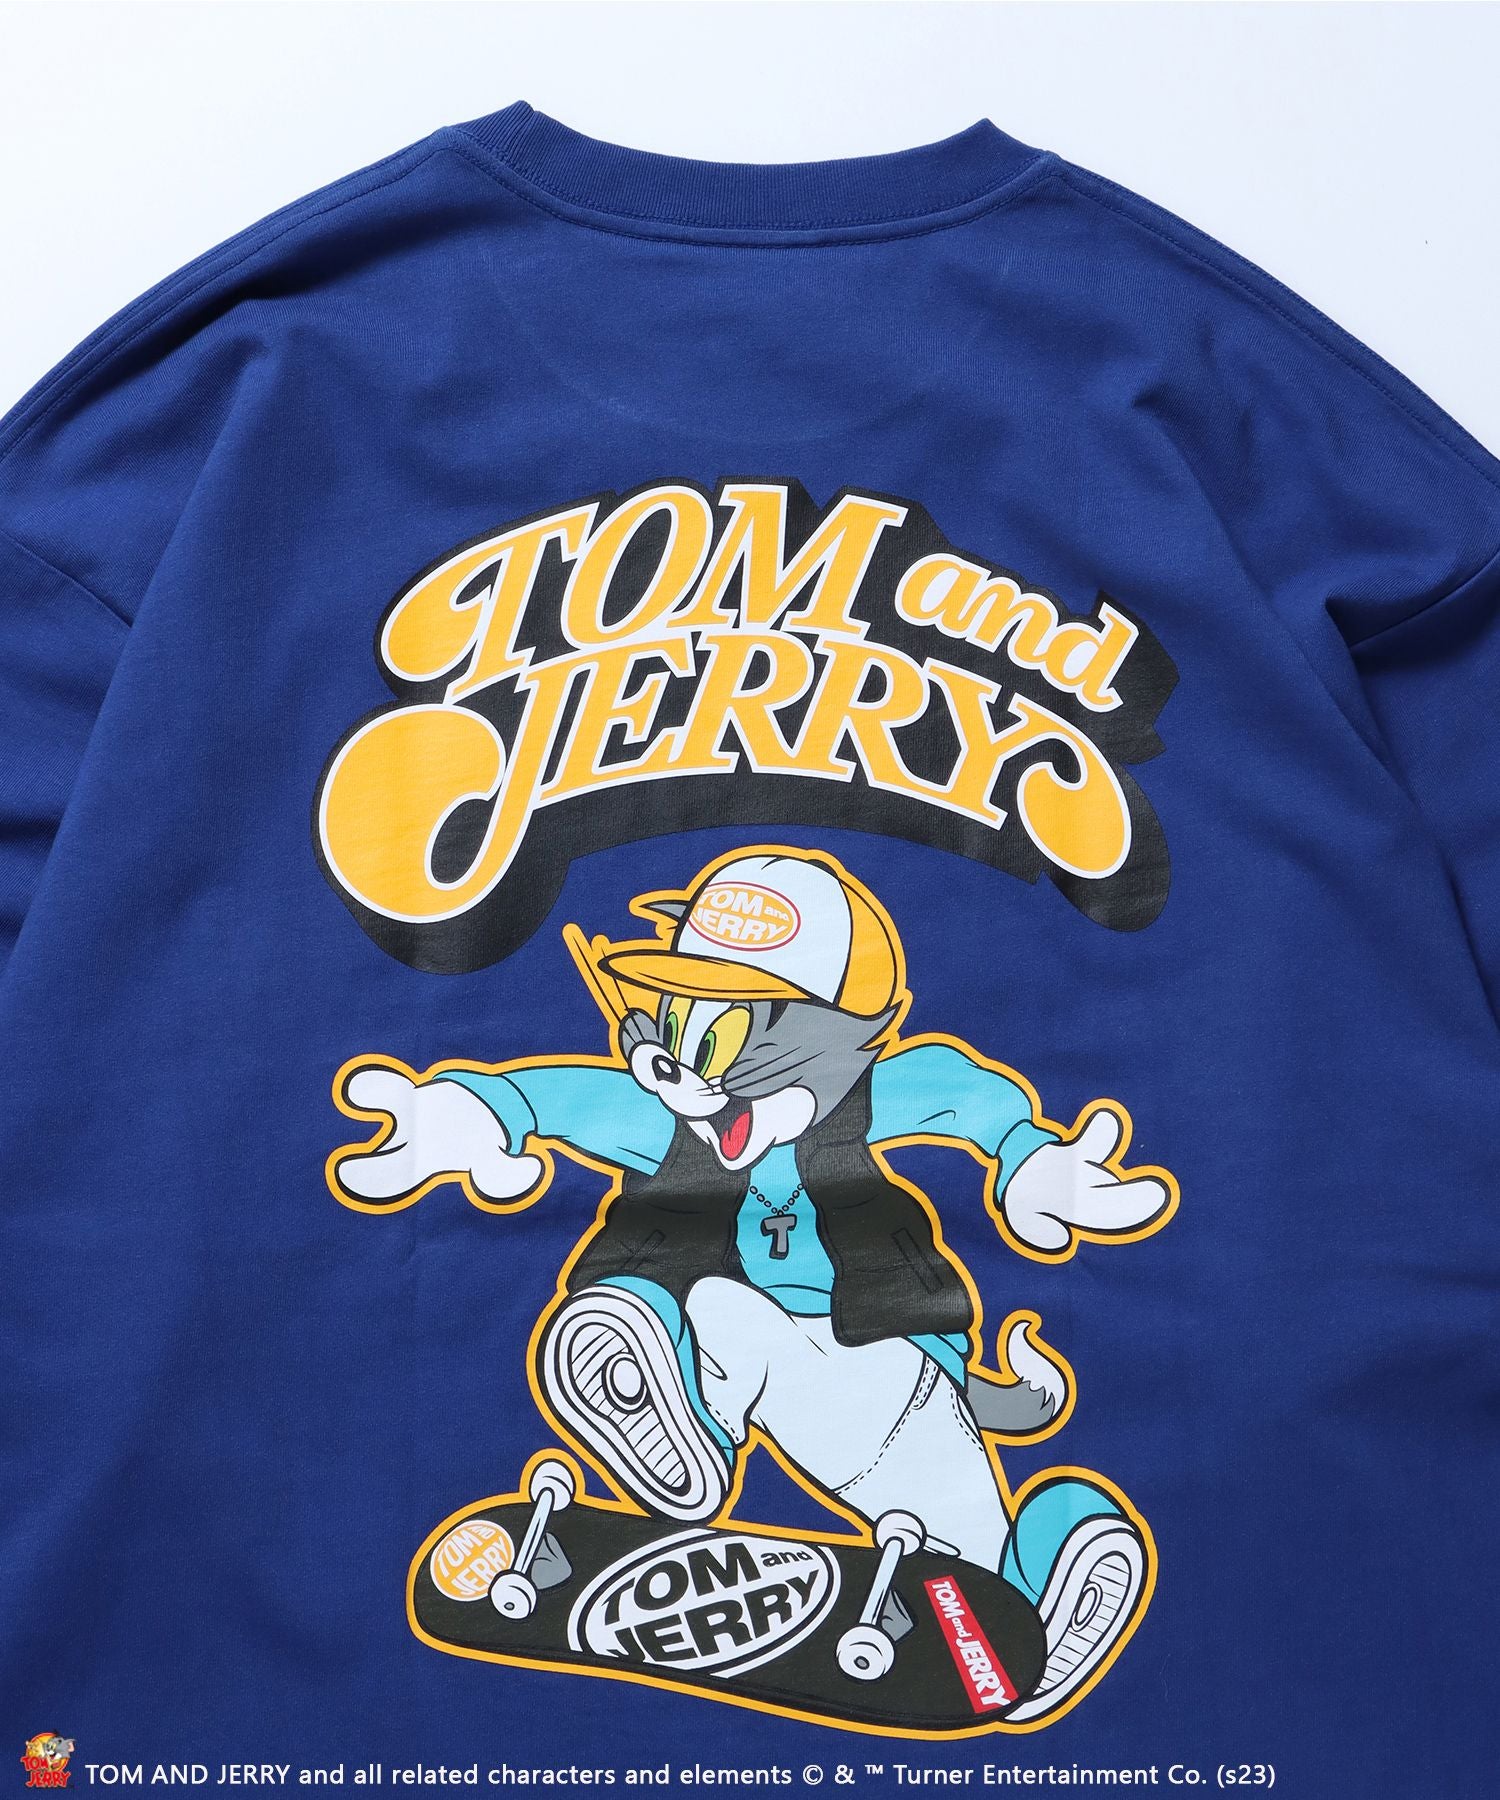 【SEQUENZ】 TOM and JERRY SK8ER L/S TEE / トムとジェリー ロンT ビックサイズ キャラクター バックプリント ロイヤルブルー